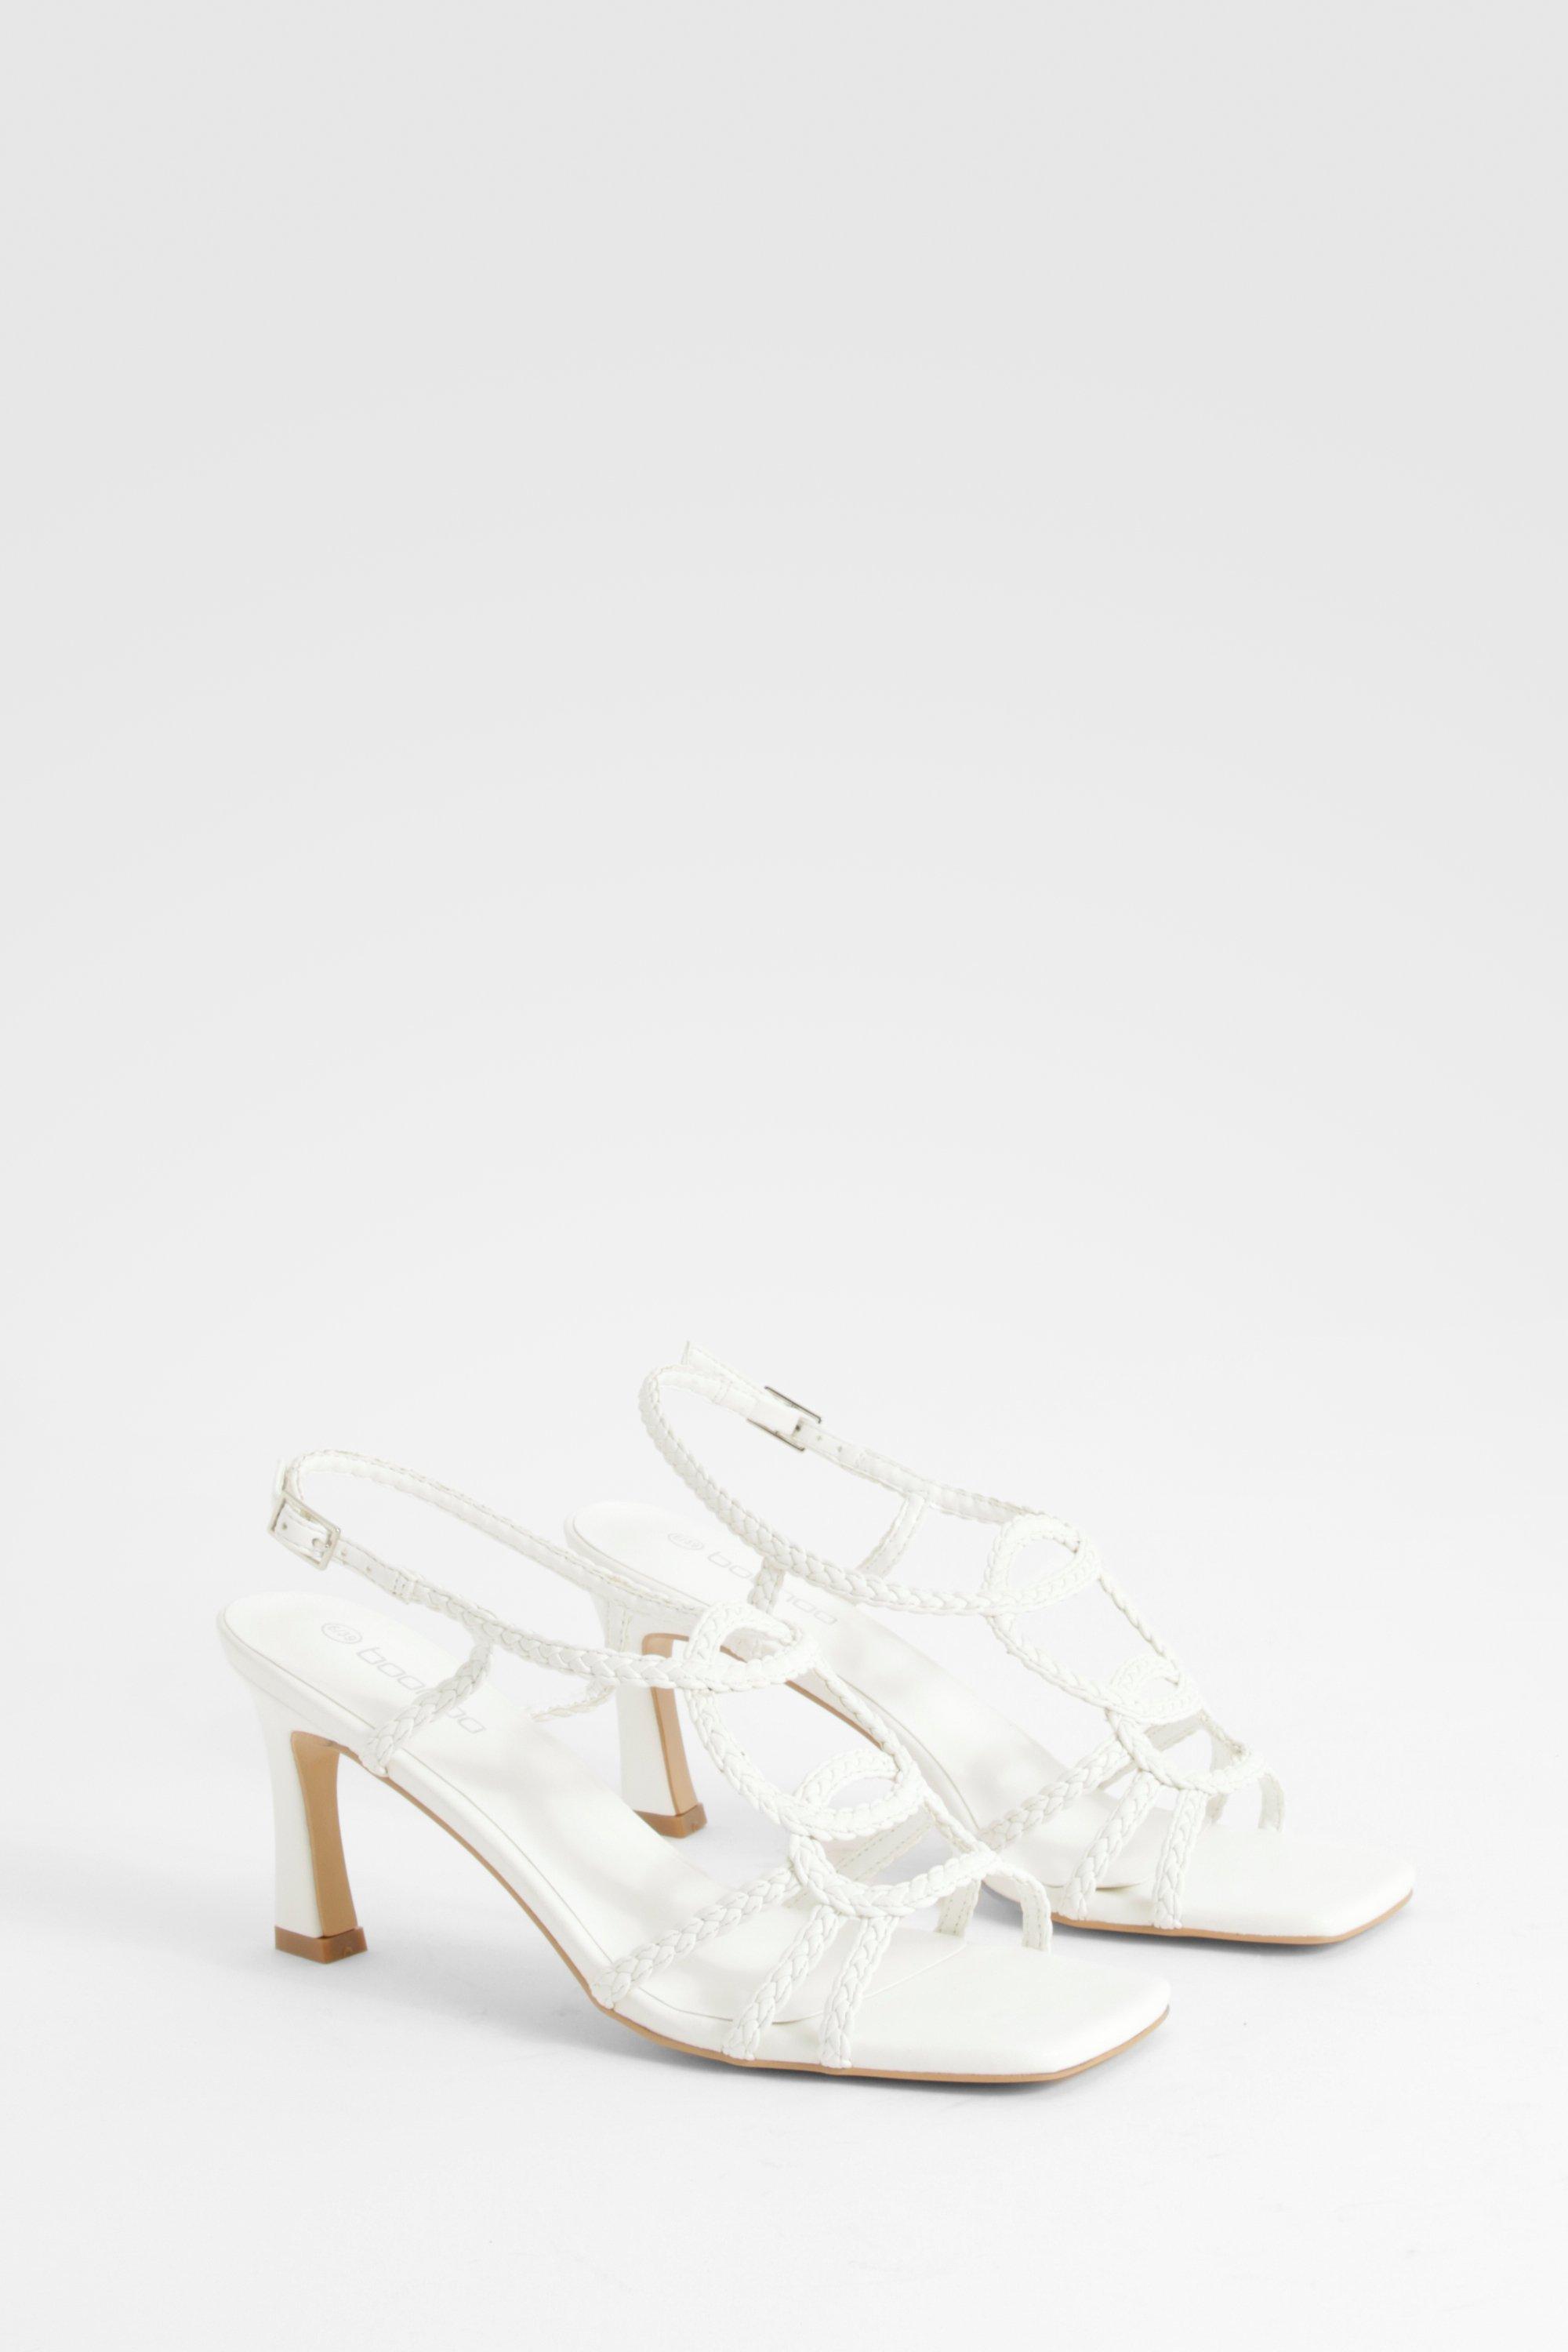 Image of Woven Detail Mid Strappy Heels, Bianco